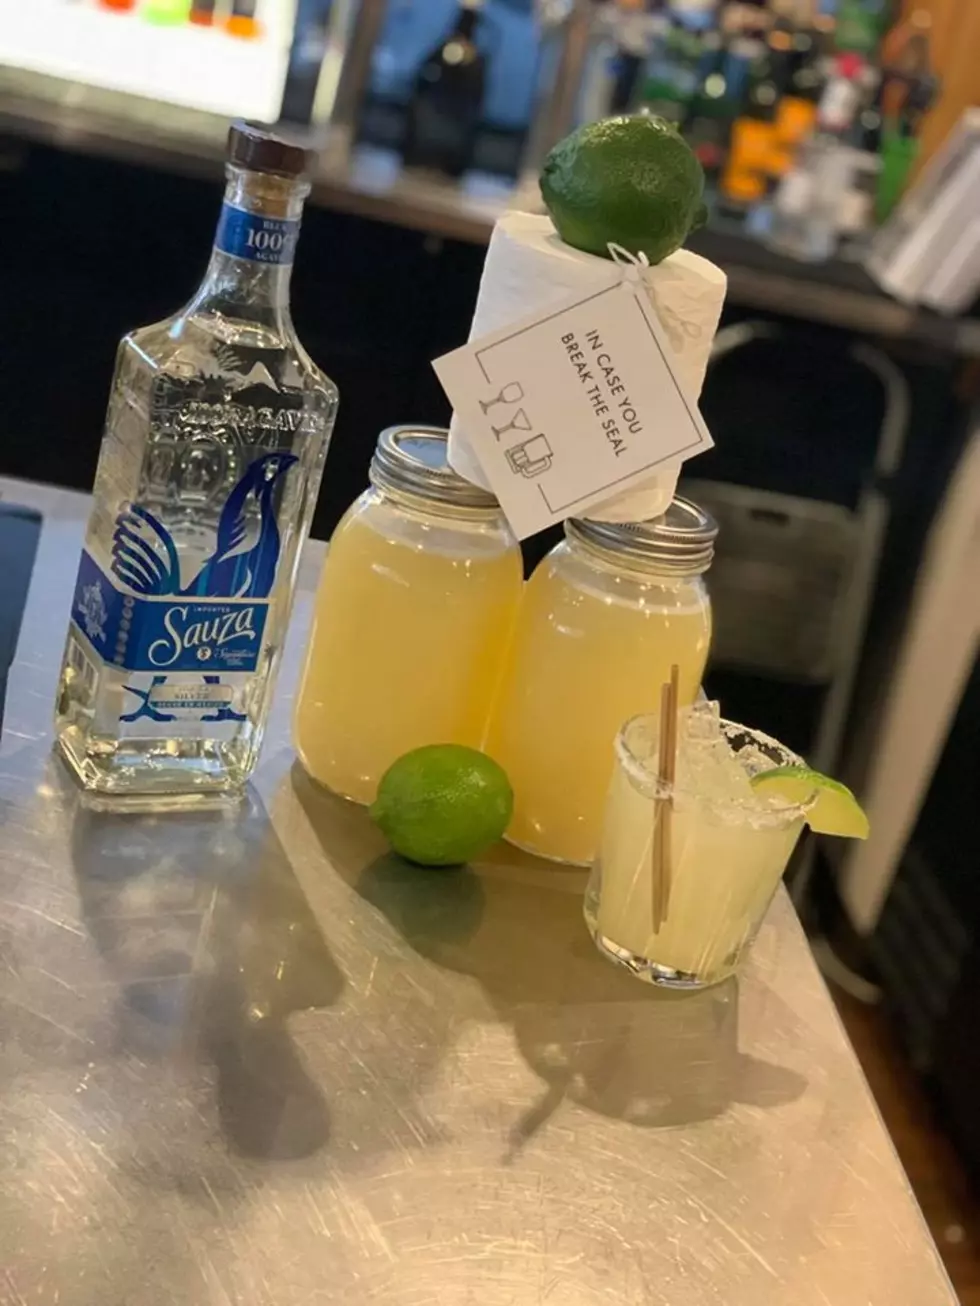 Local Restaurants Offering Craft Cocktail Kits To Go